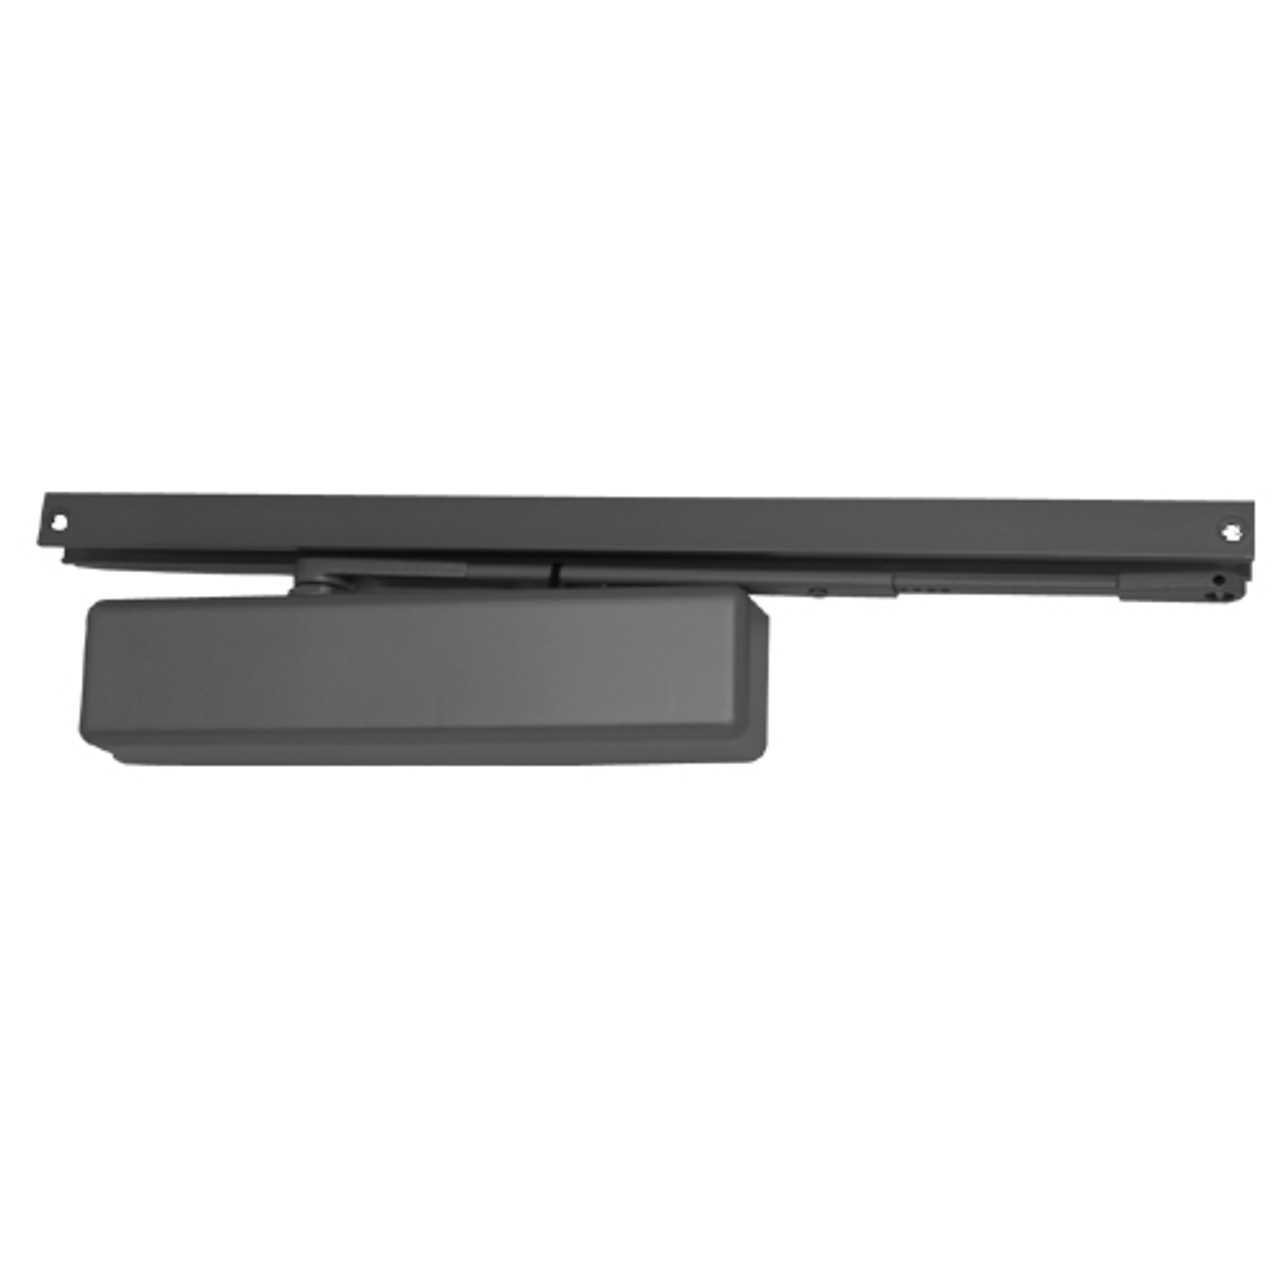 1460T-H-BUMPER-BLACK LCN Surface Mount Door Closer with Hold Open Track with Bumper in Black Finish